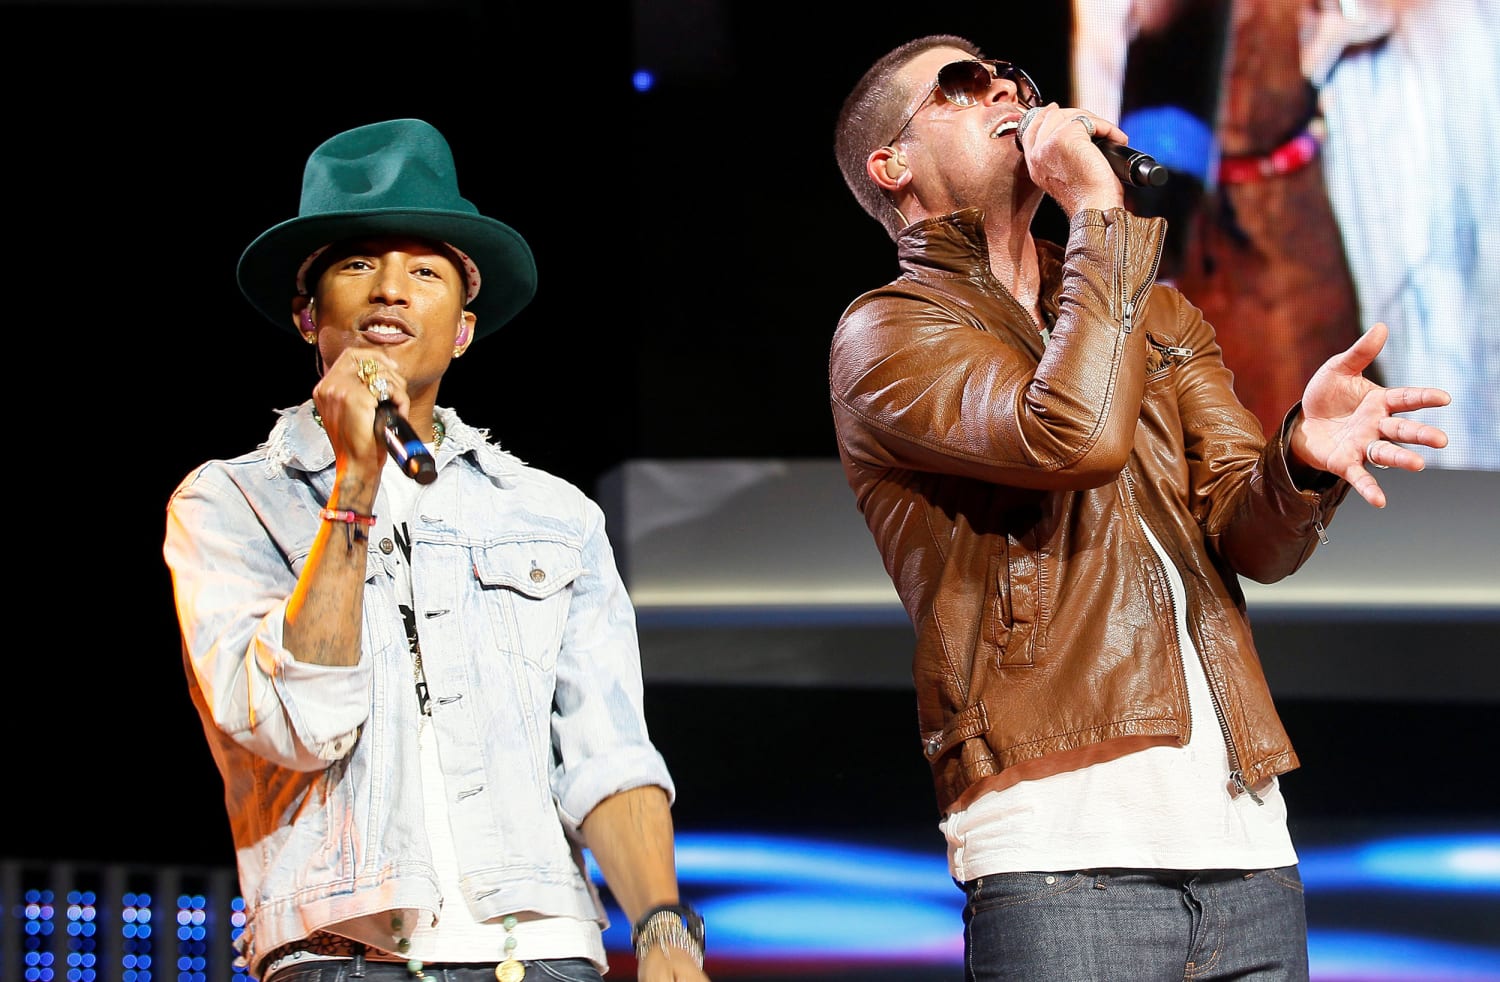 Pharrell Williams Accused of Perjury by Marvin Gaye Family